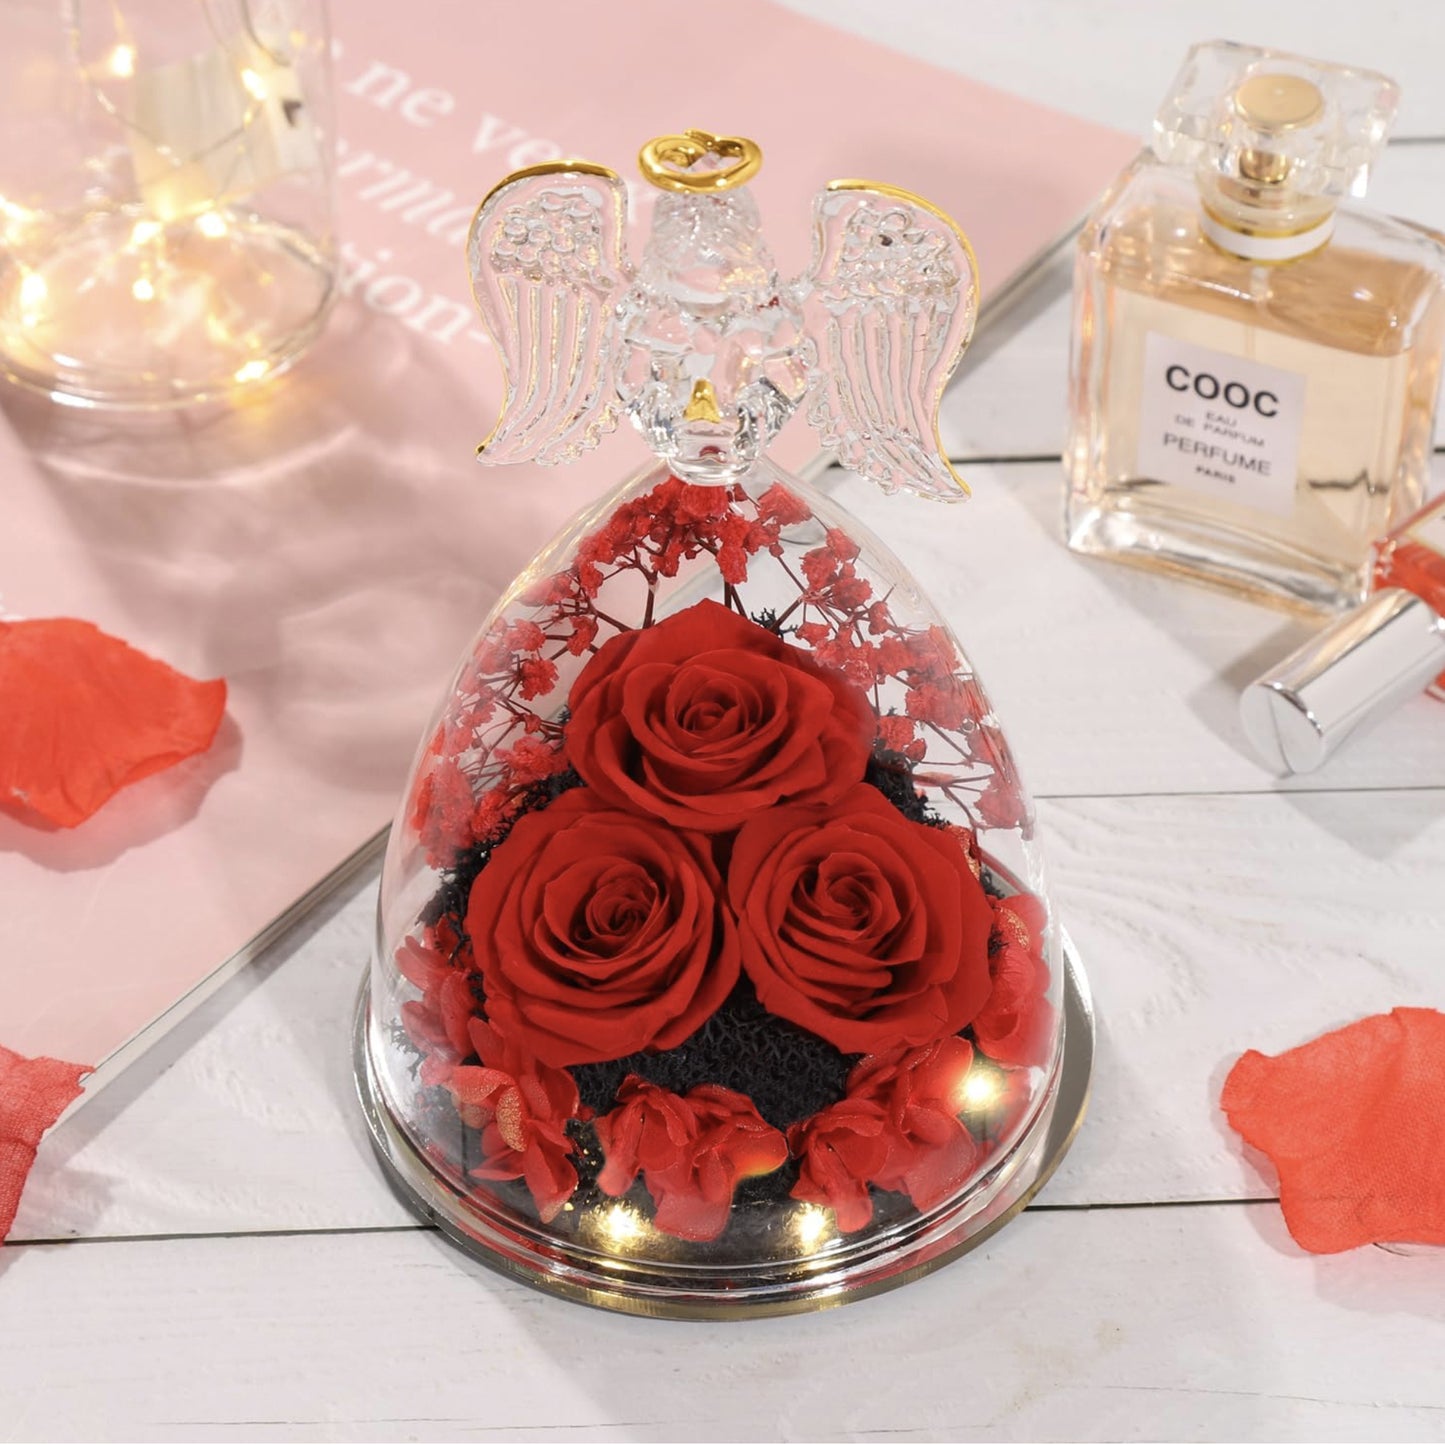 3pcs Red Preserved Rose In Angel Glass Dome